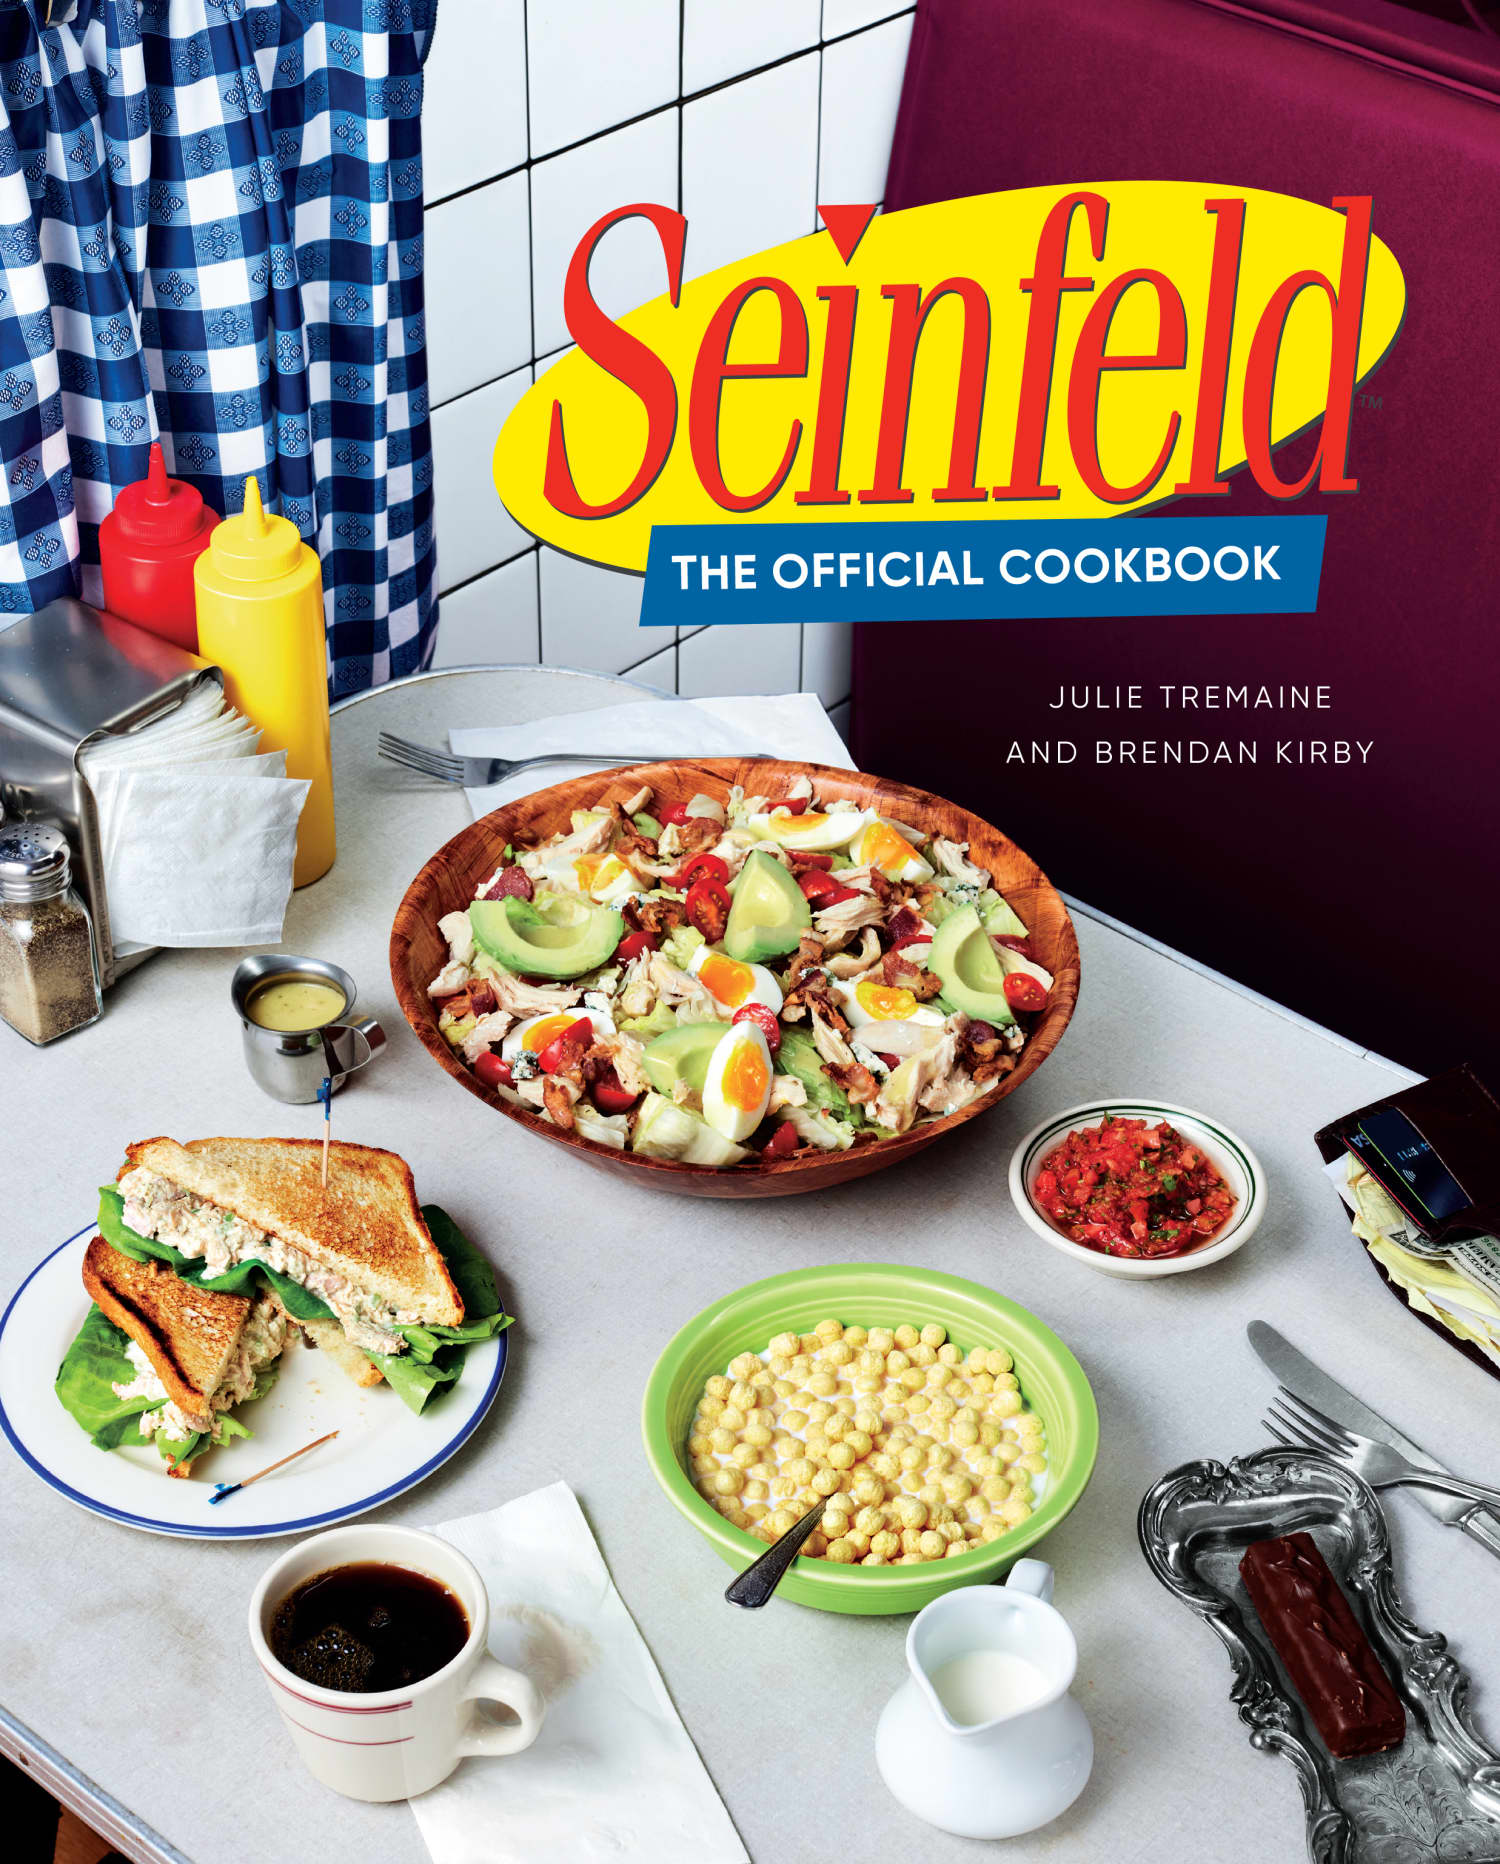 An Official “Seinfeld” Cookbook Is Coming This Fall, So There’ll Be Plenty of Soup for You